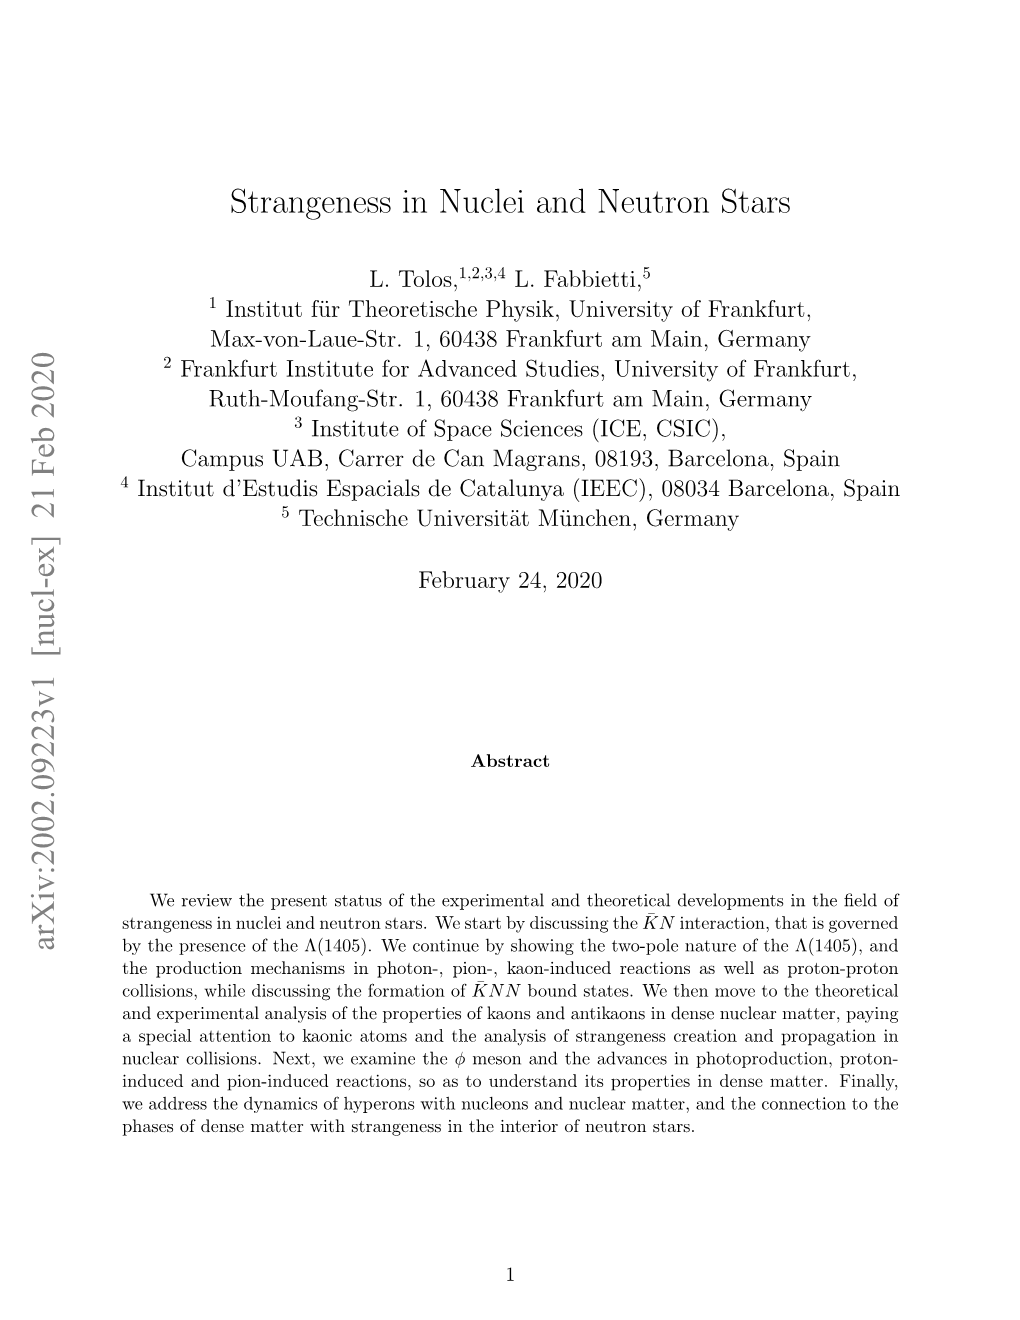 Strangeness in Nuclei and Neutron Stars Arxiv:2002.09223V1 [Nucl-Ex]